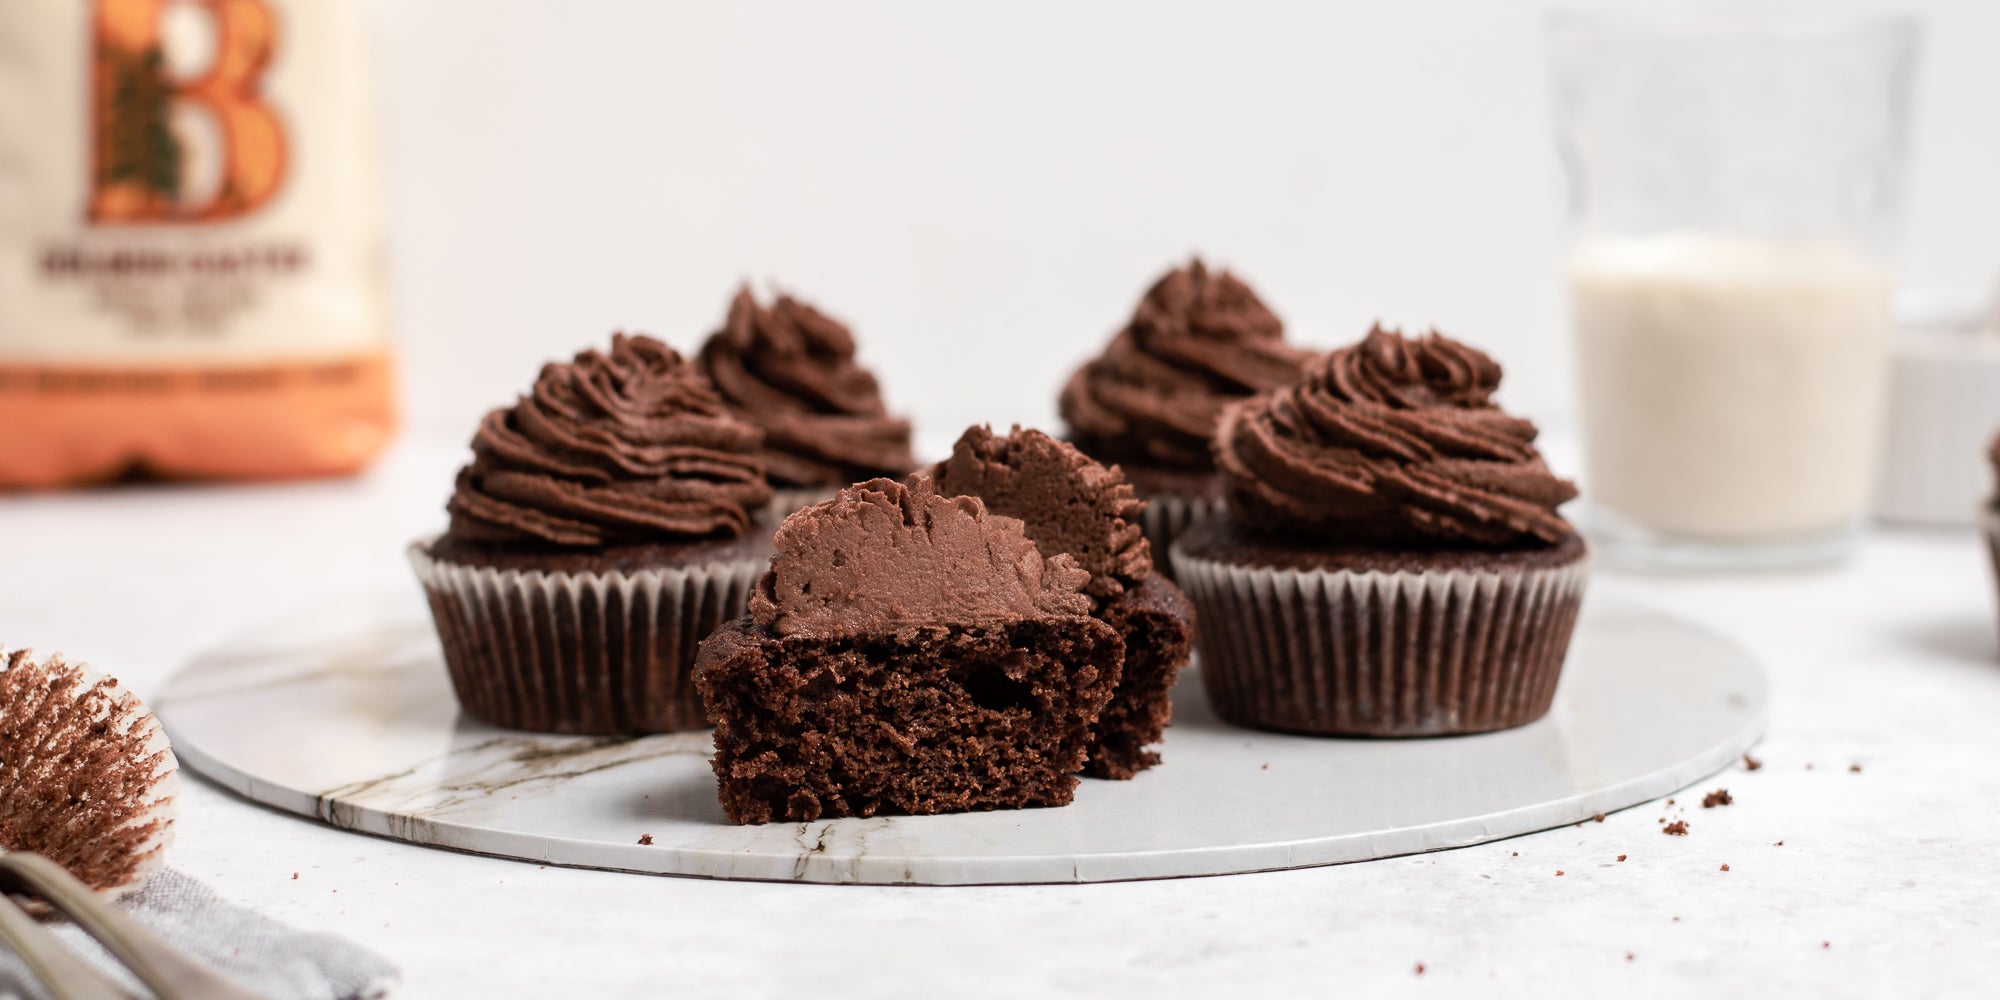 Close up of Vegan Chocolate Cupcakes on a marble board, with a cupcake cut in half showing the centre. A pack of Billington's Golden Caster sugar in the background